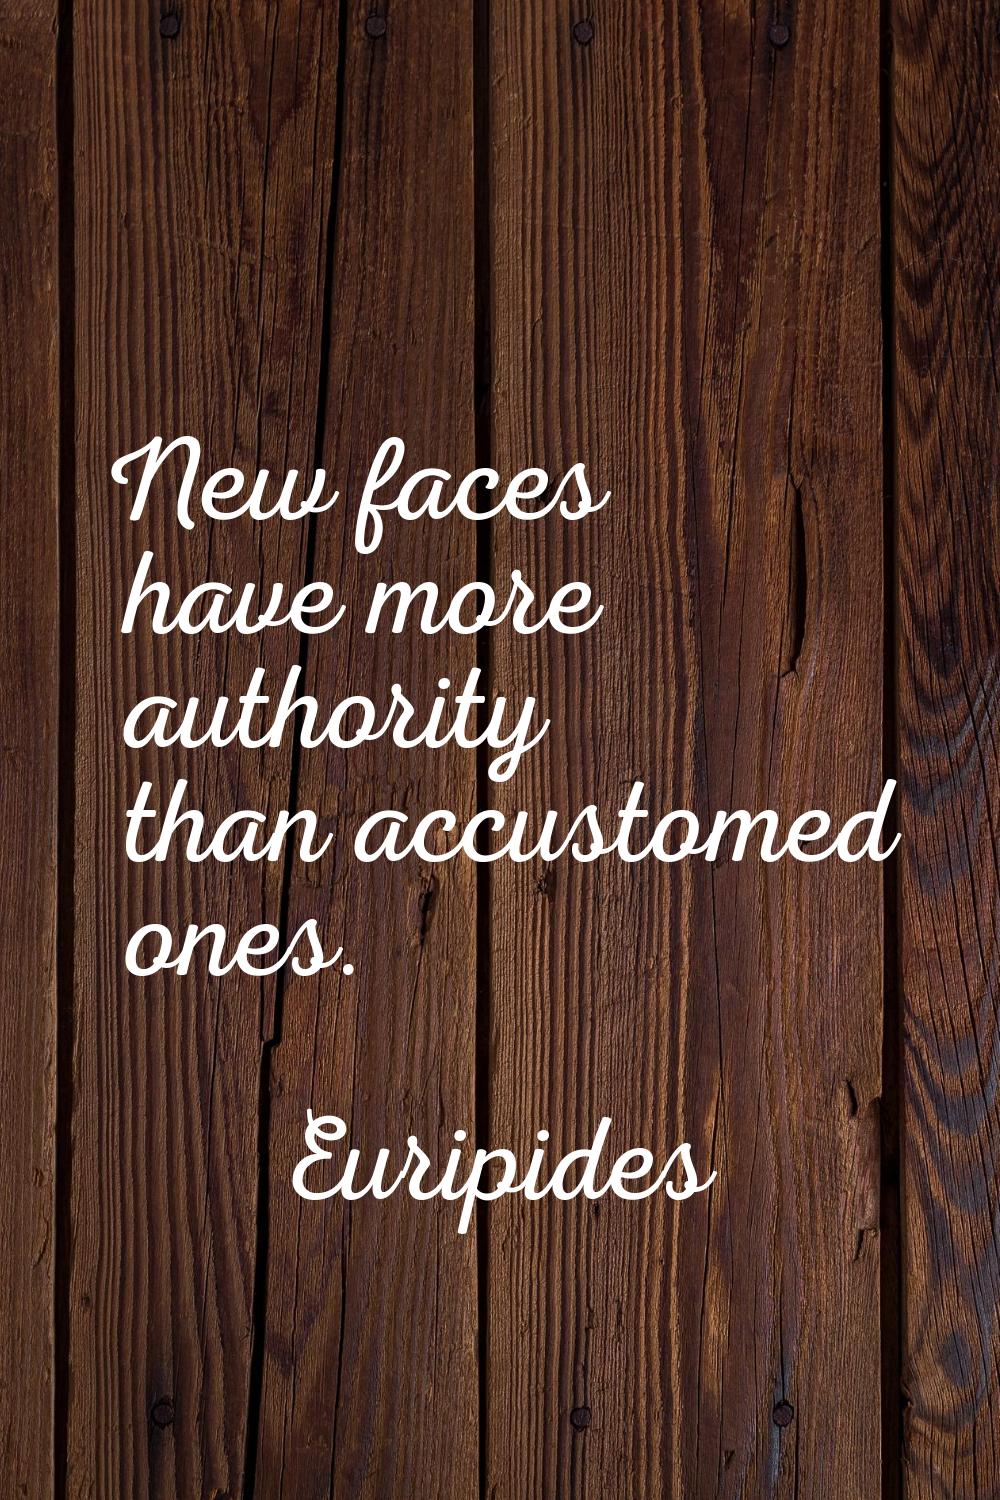 New faces have more authority than accustomed ones.